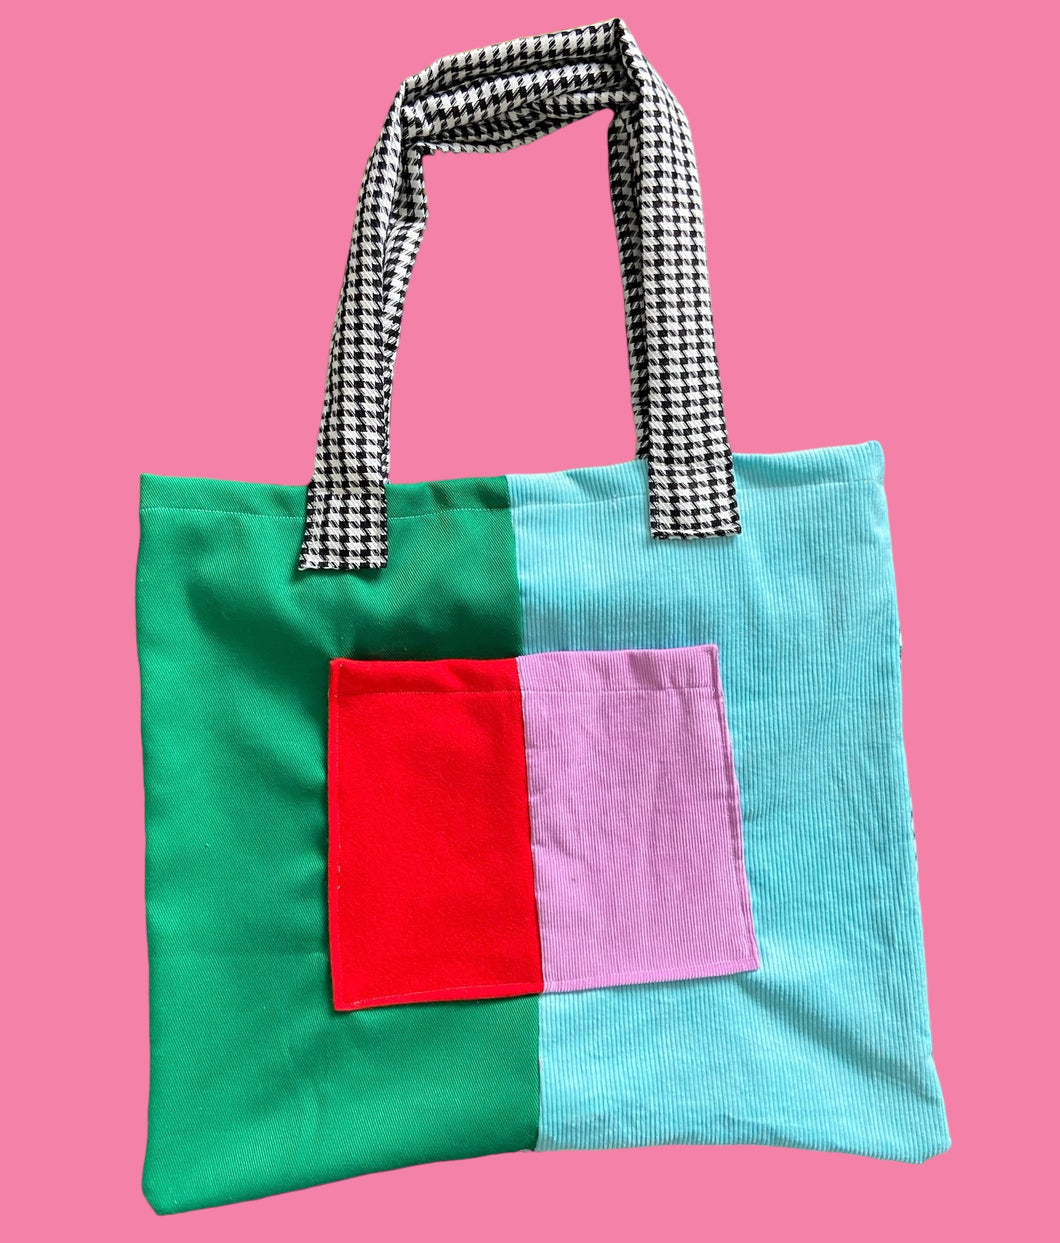 Learn to Sew a Tote Saturday 3/16